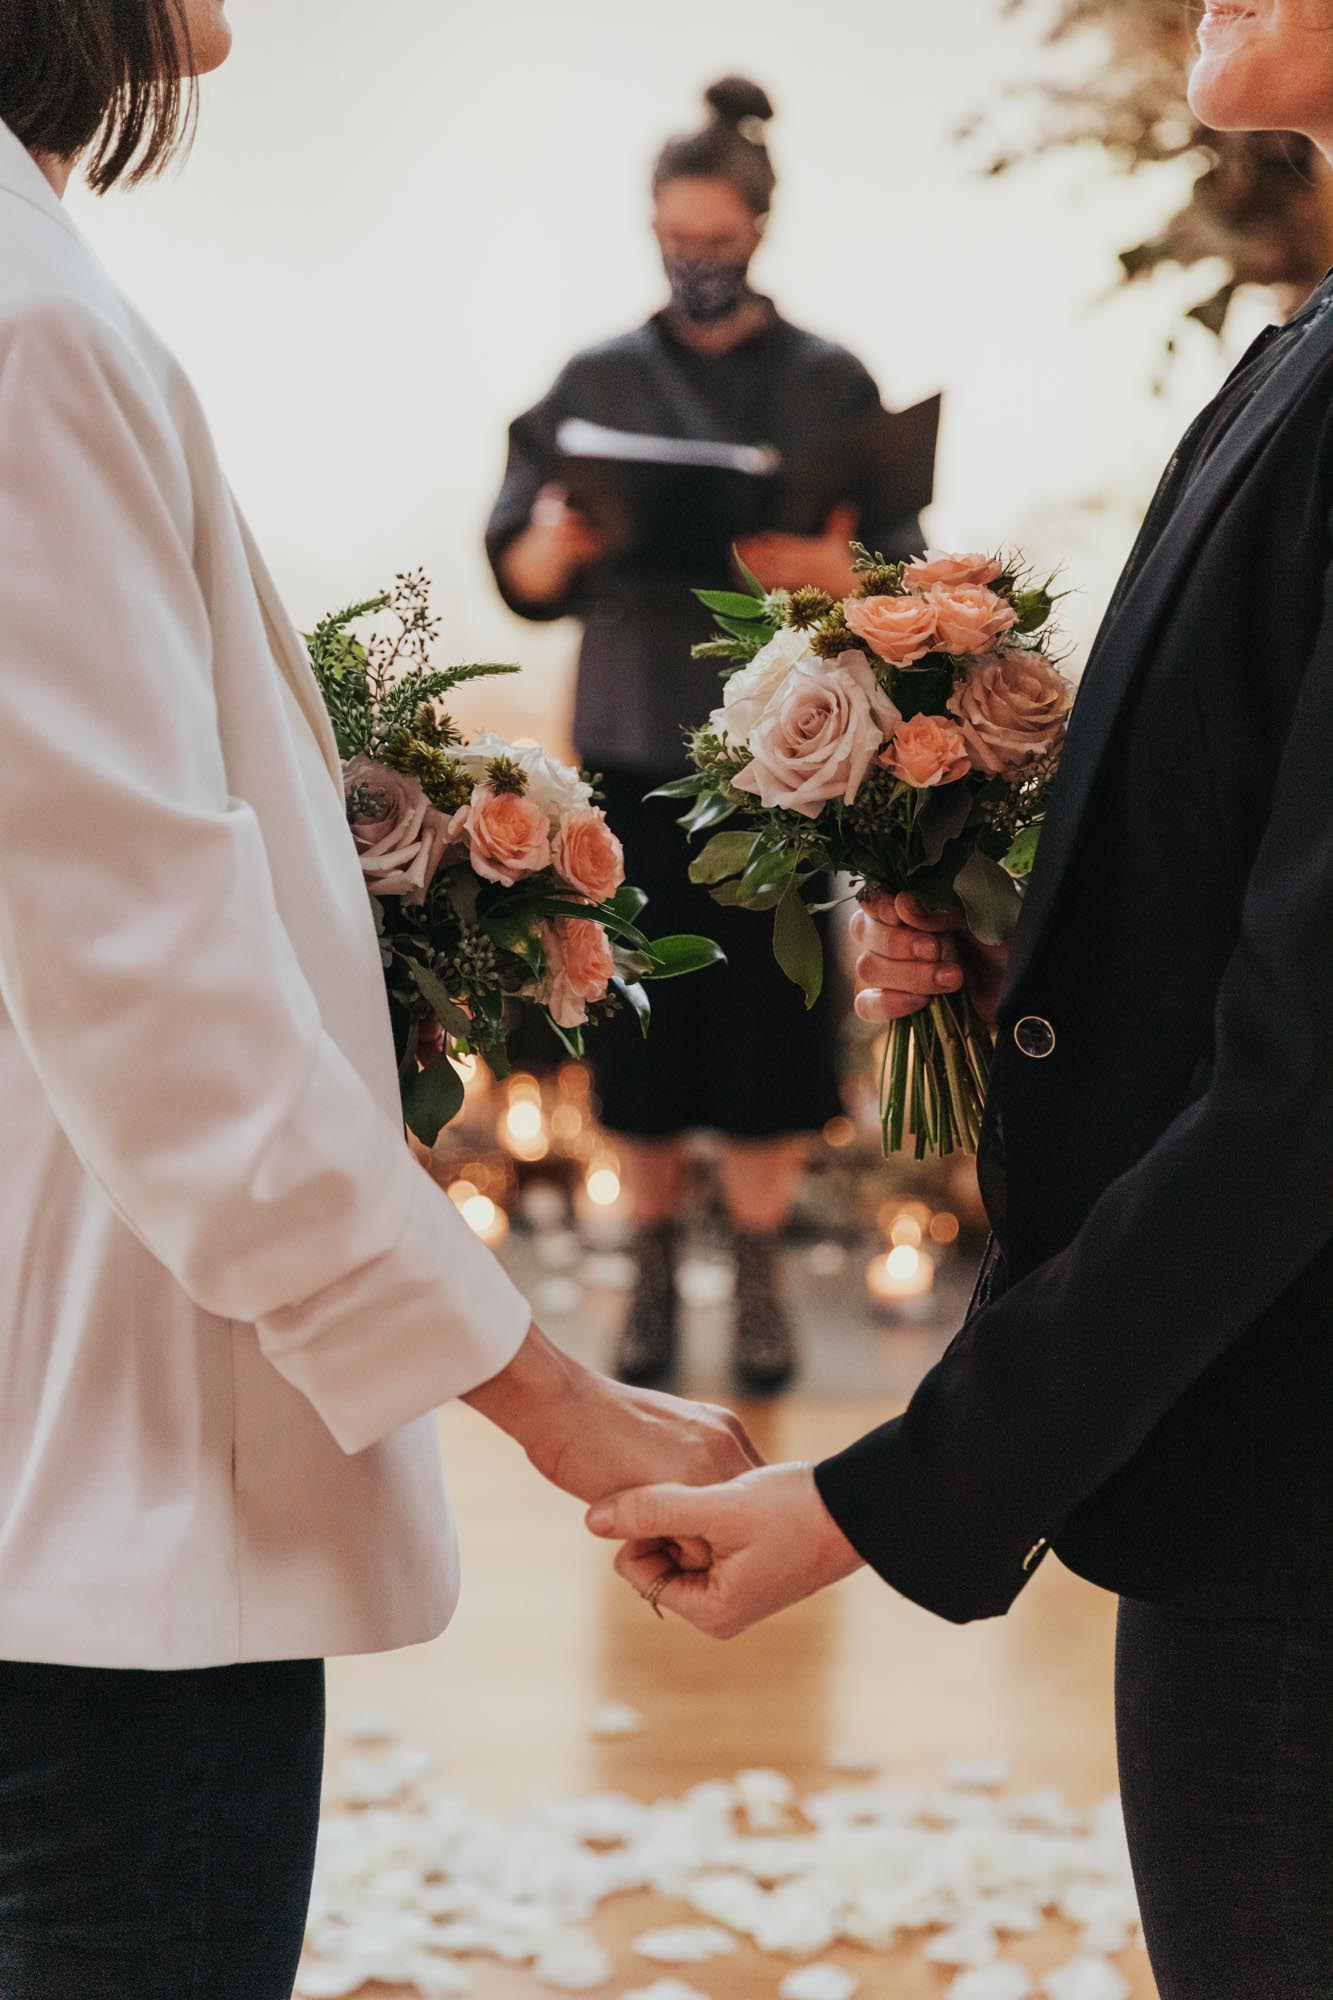 10 LGBTQ+ couples in Portland, Oregon tied the knot in a special marriage-athon event | Marissa Solini | Featured on Equally Wed, the leading LGBTQ+ wedding magazine